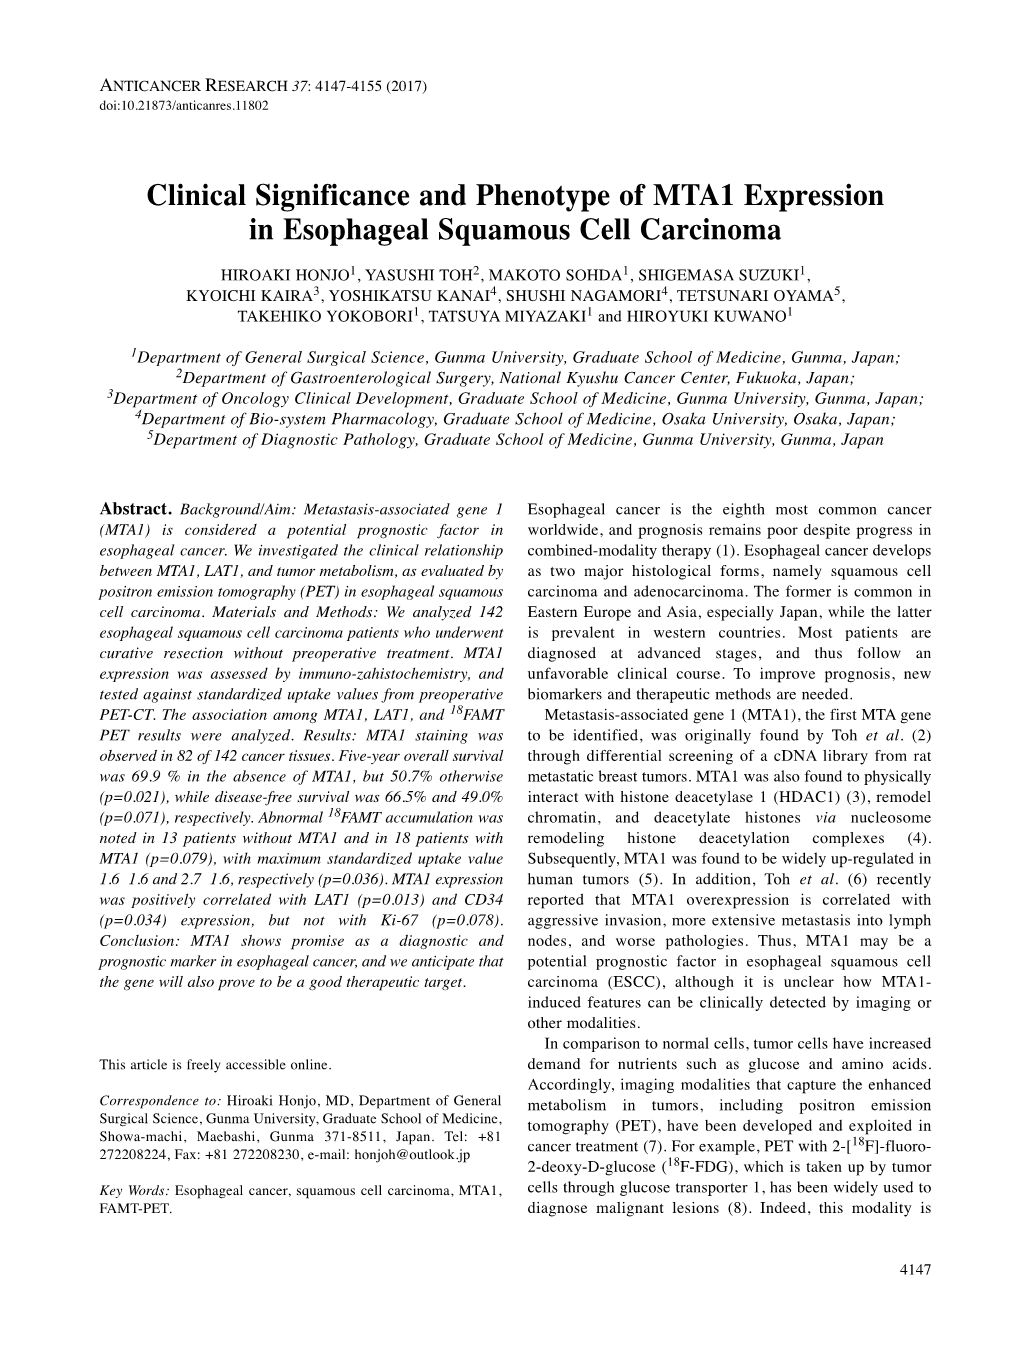 Clinical Significance and Phenotype of MTA1 Expression in Esophageal Squamous Cell Carcinoma